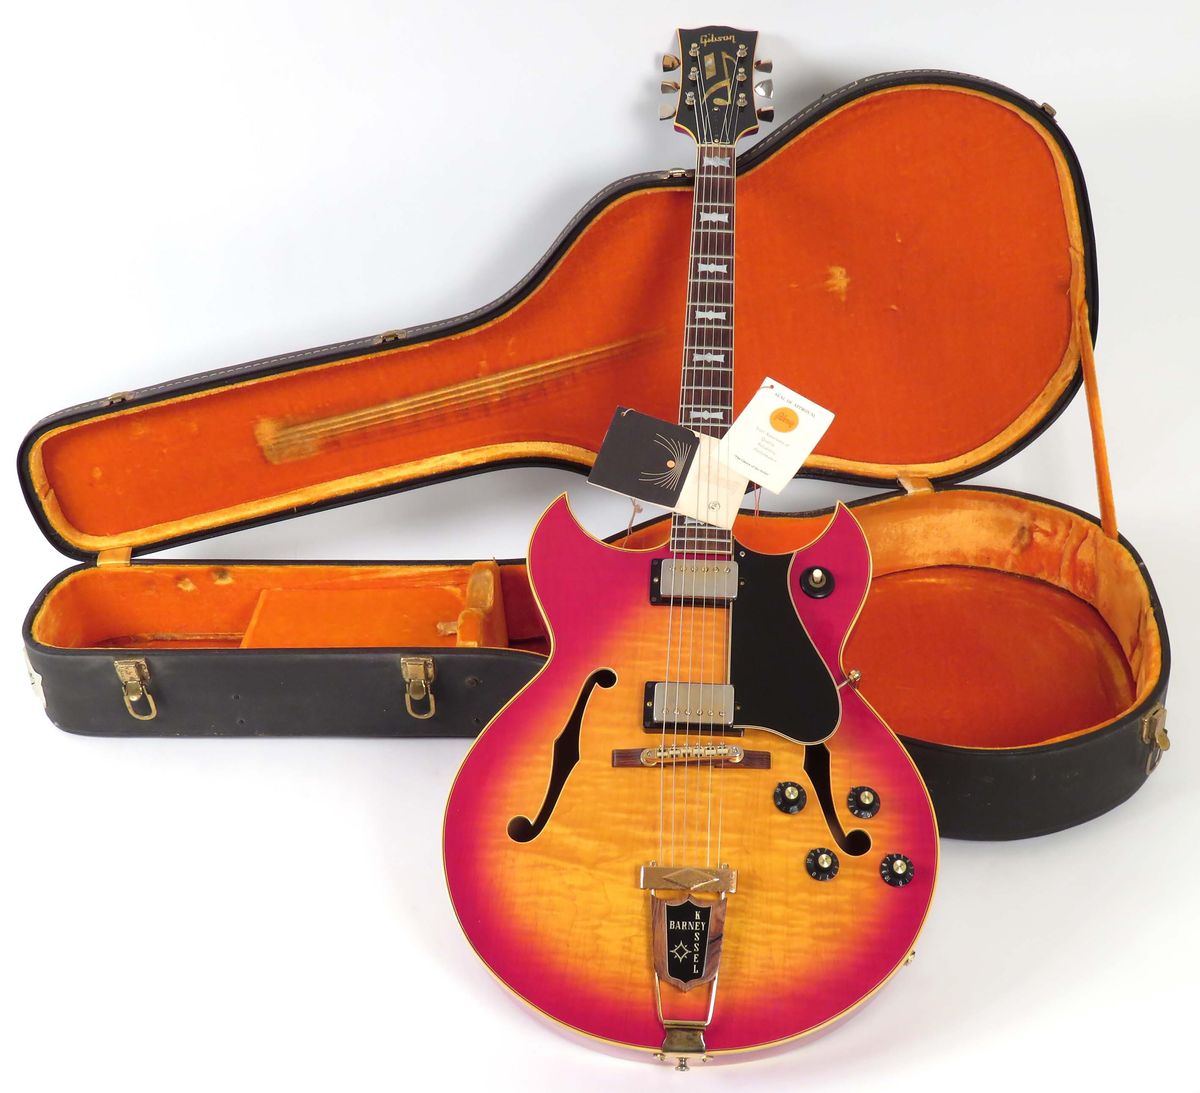 A Barney Kessel Custom Saved from the Buzzards